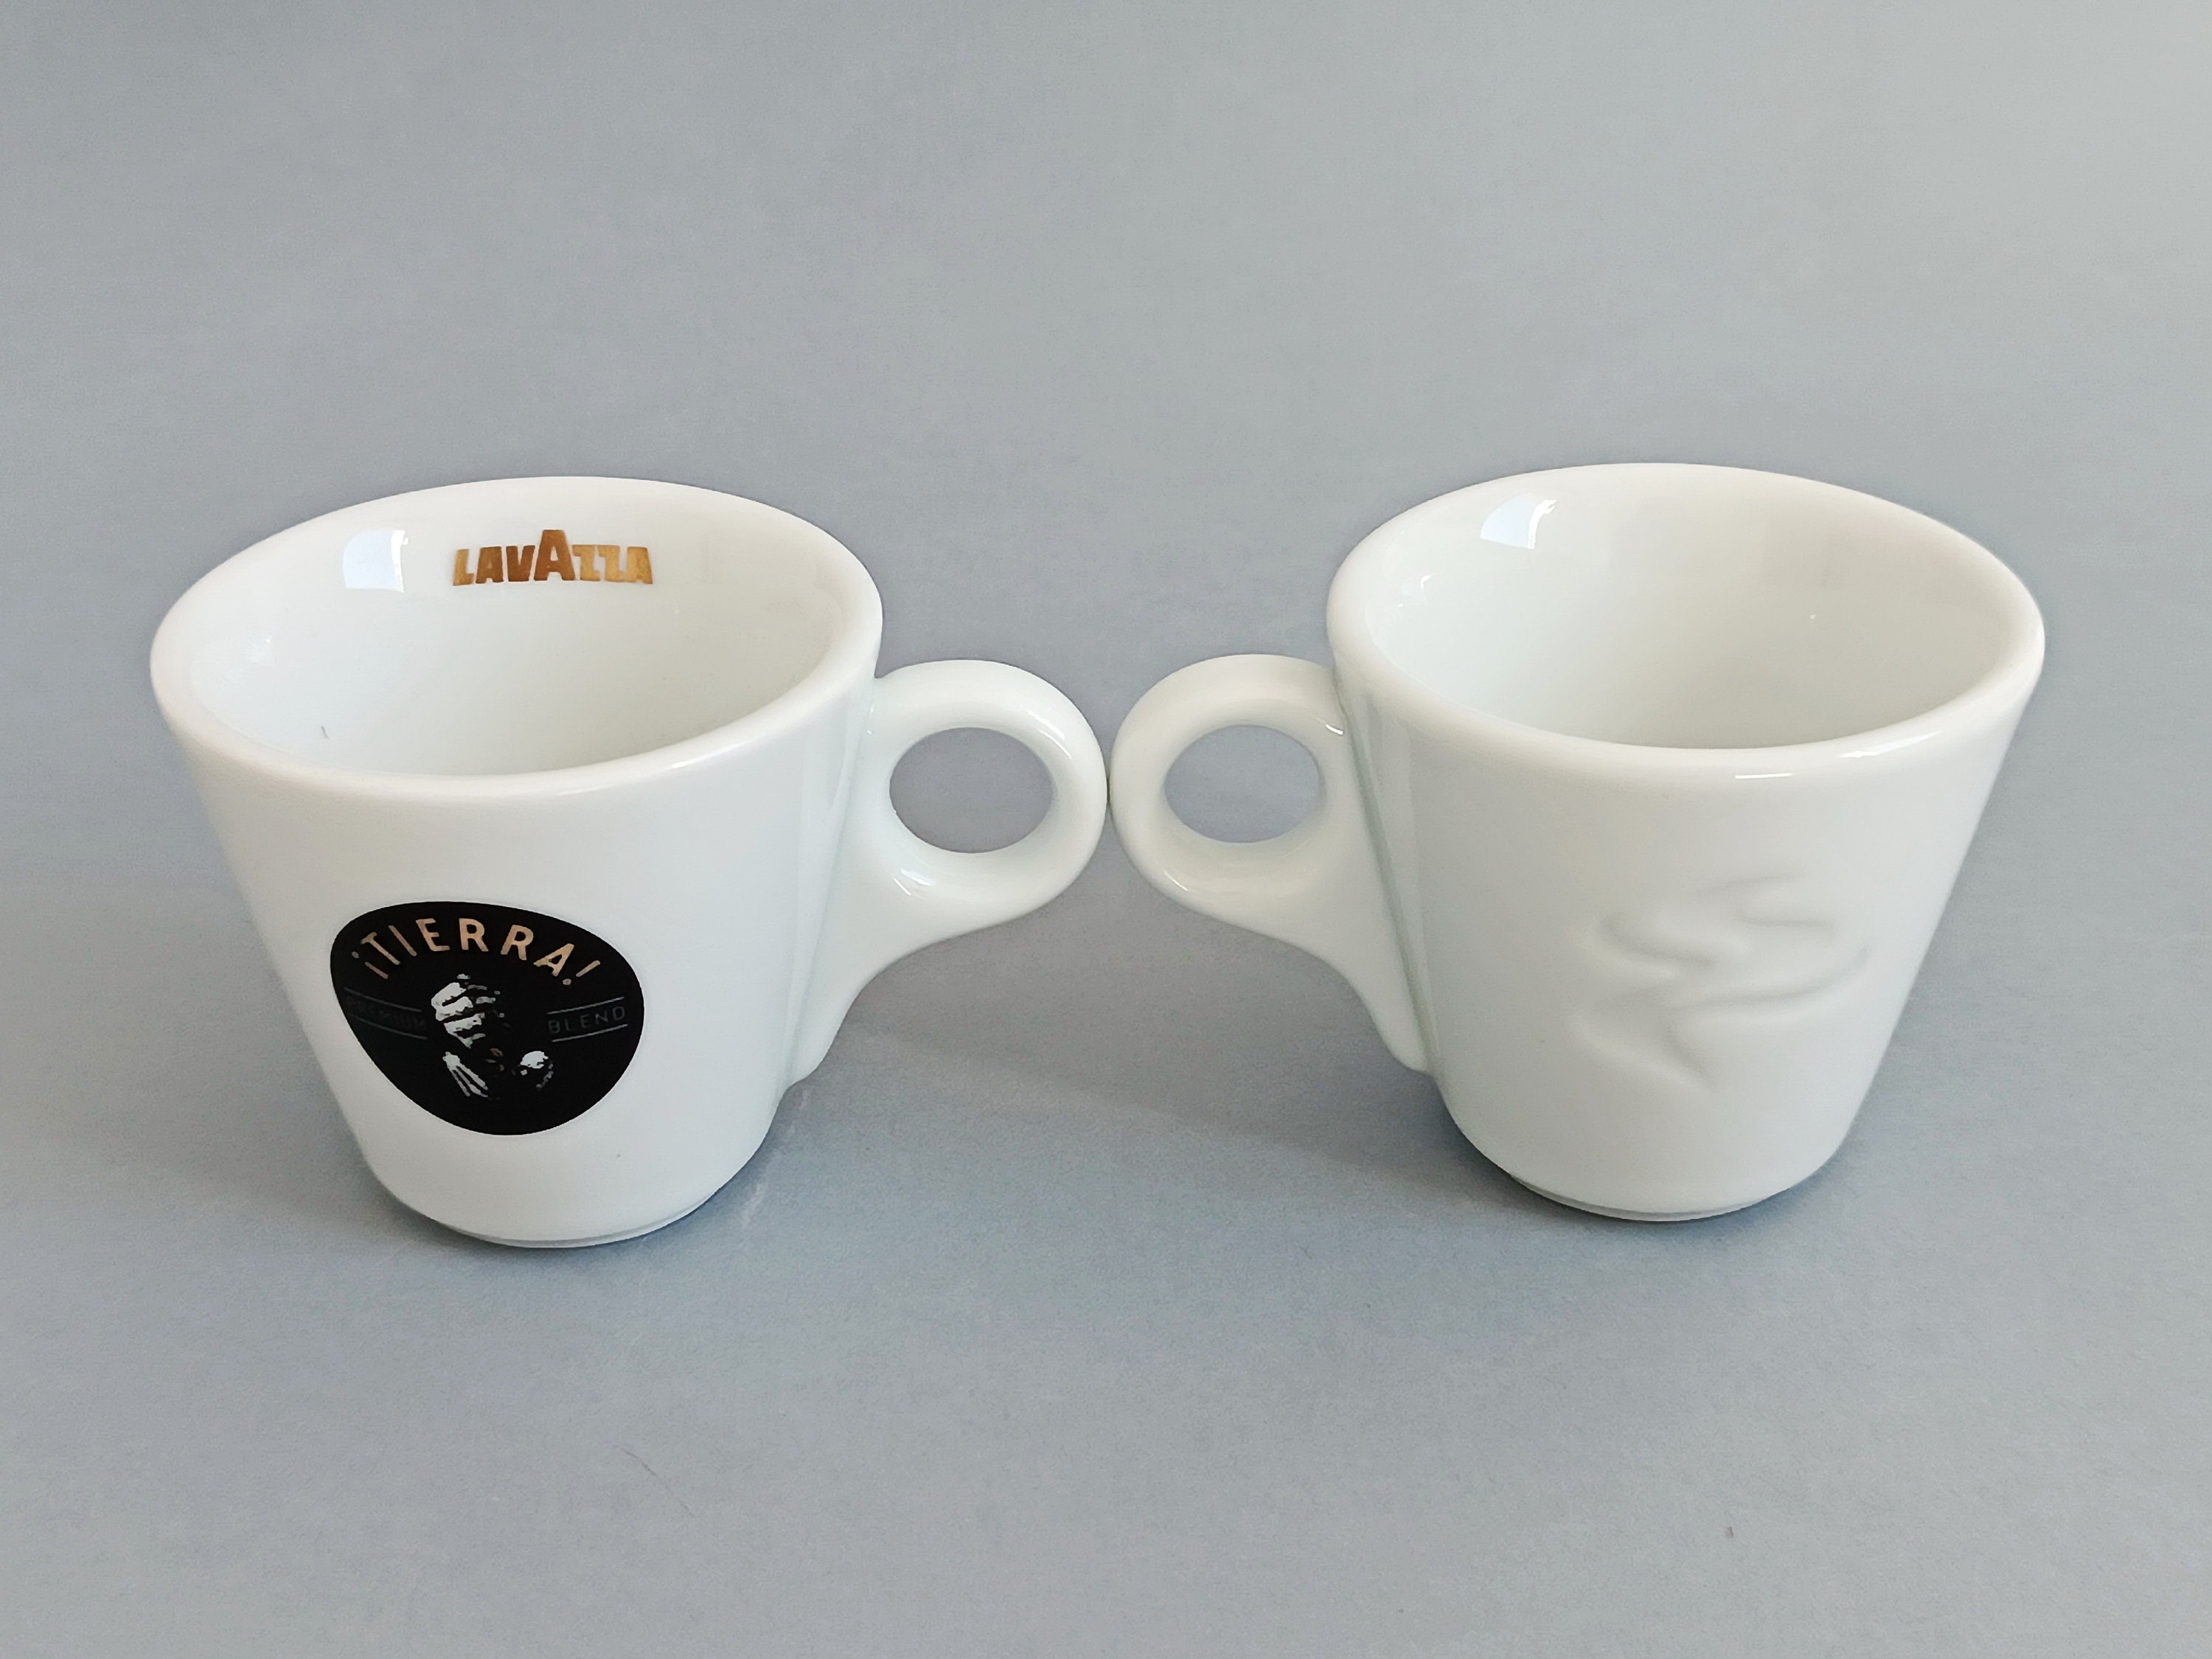 Limited edition Golden globes Lavazza espresso cup for Sale in Los Angeles,  CA - OfferUp